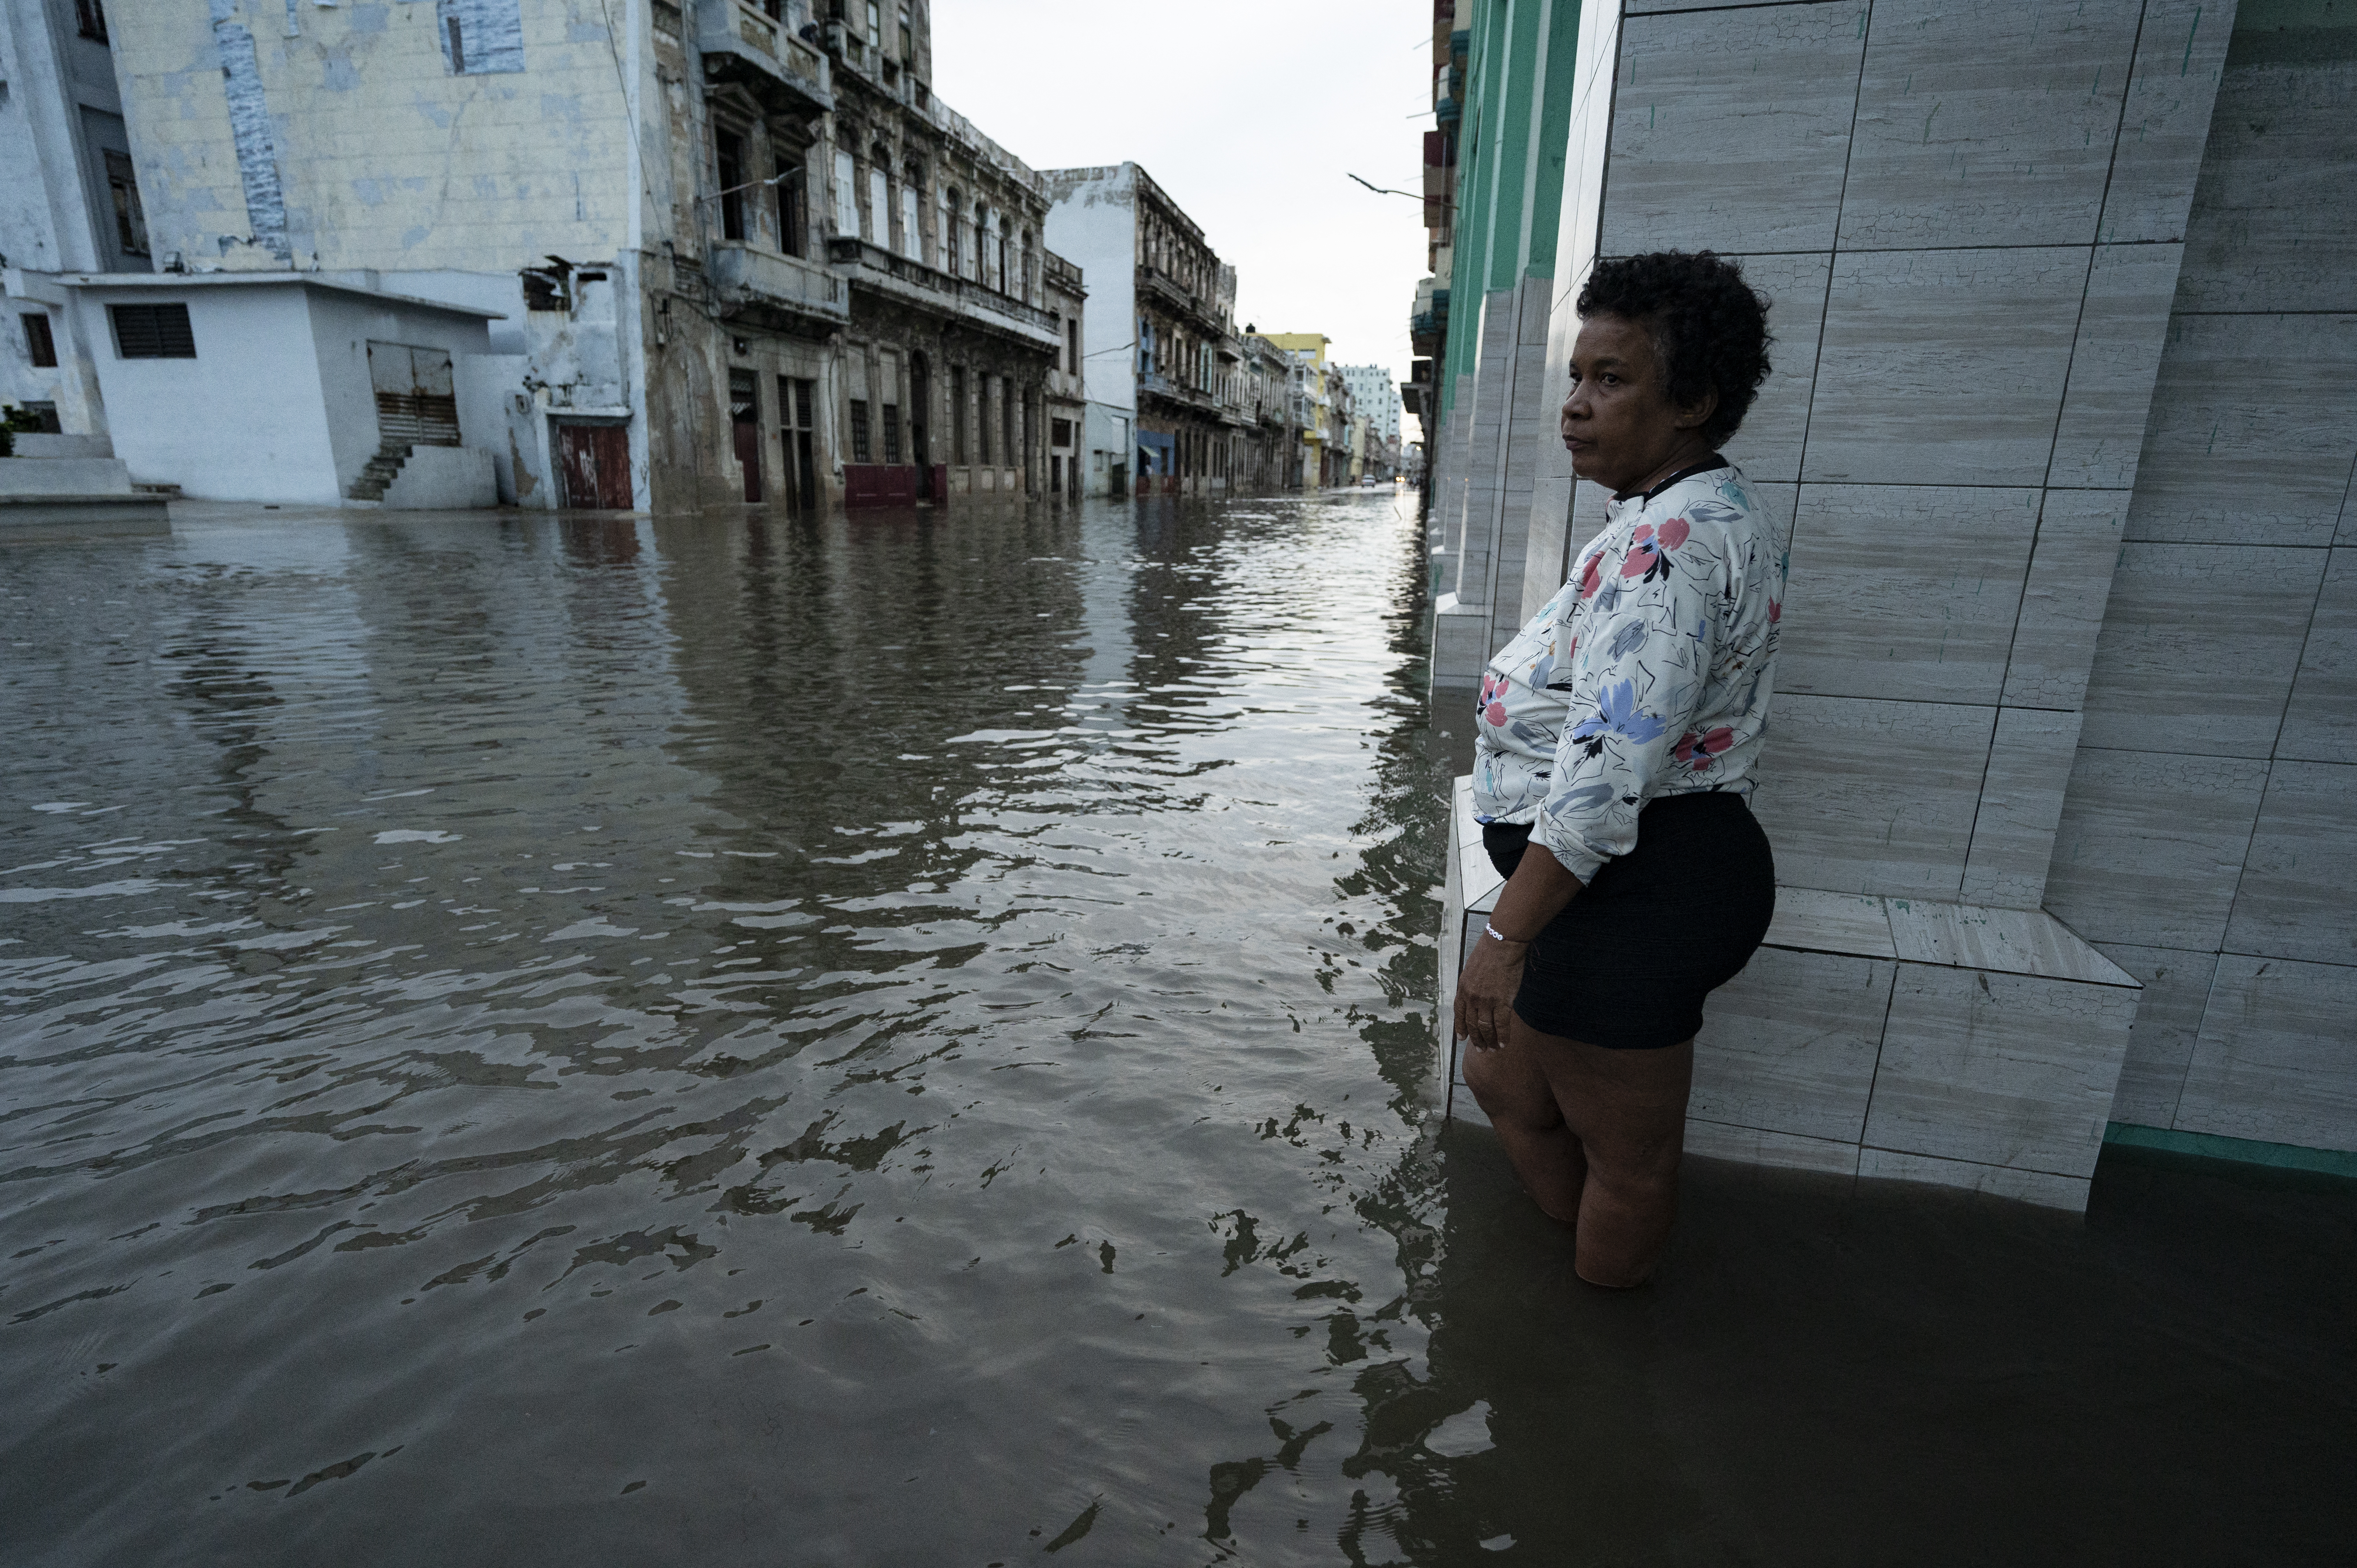 A woman stands in a flooded street in Havana after Hurricane Ian passed through on September 28, 2022.  - Cuba crossed 12 hours this Wednesday "Zero power generation" After the passage of the powerful Cyclone Ian, due to failures in the National Electricity System (SEN) connections.  (Photo by Yamil Laj/AFP)